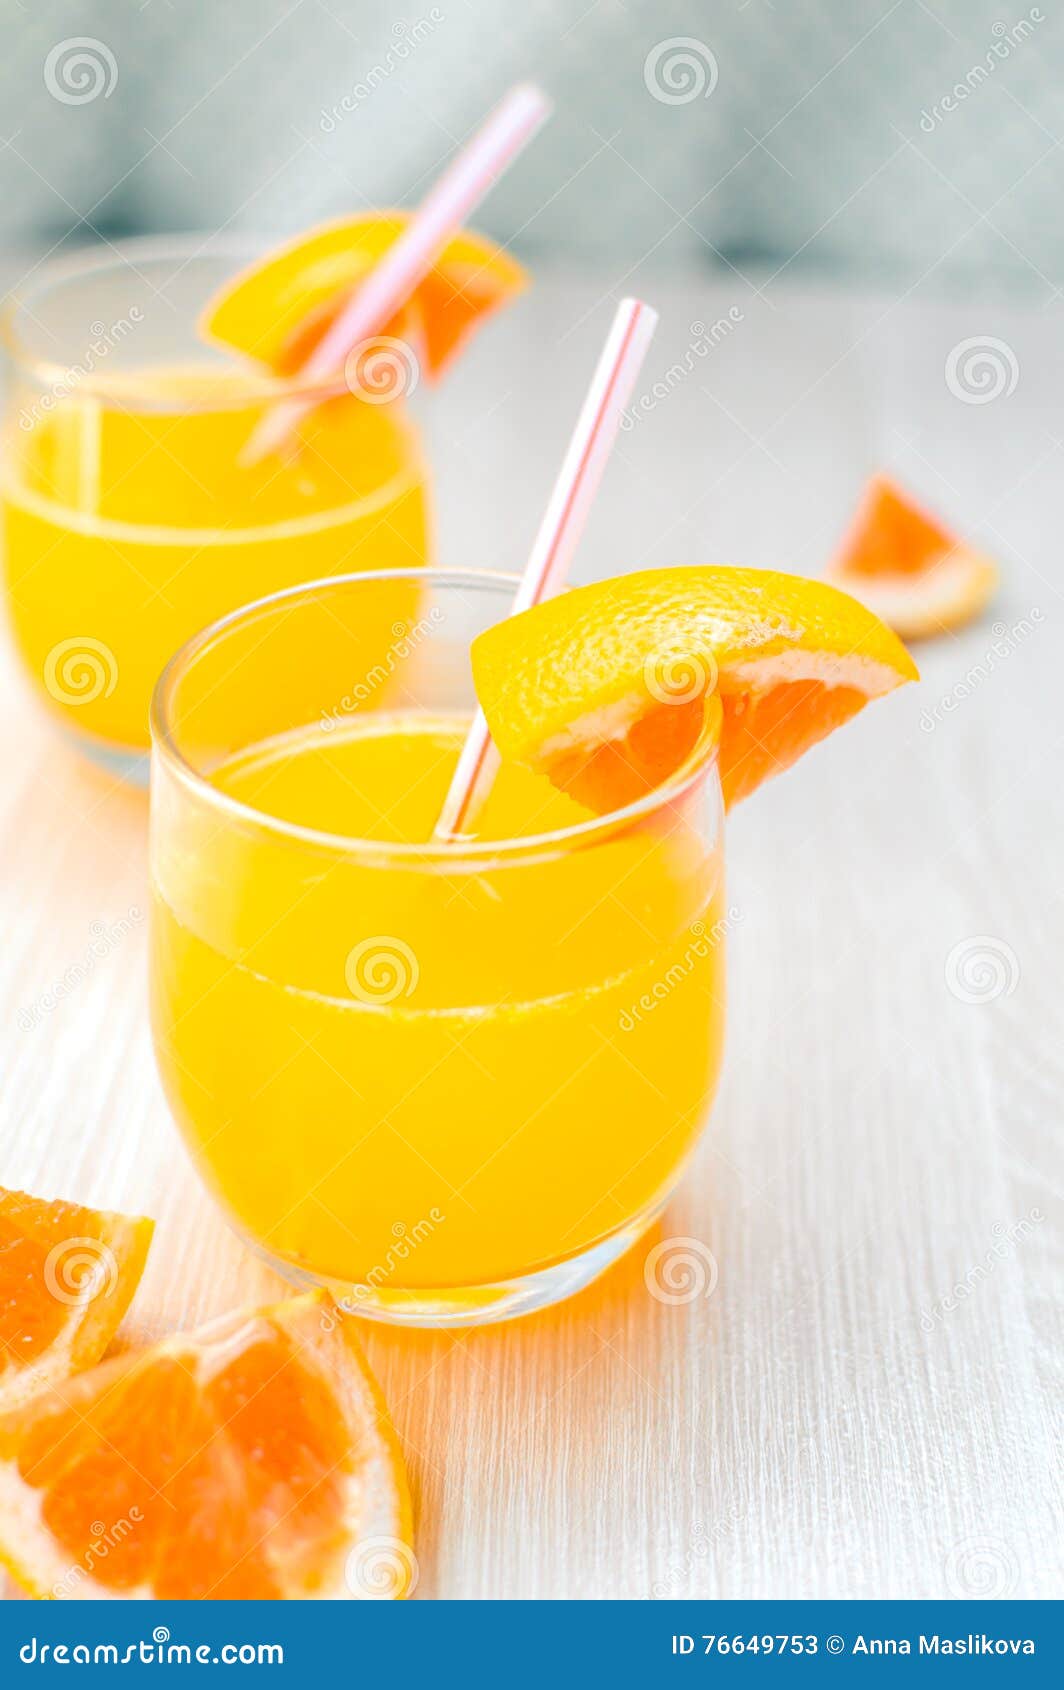 Some Orange Juice with Straw into Glass for Breakfast Stock Image ...